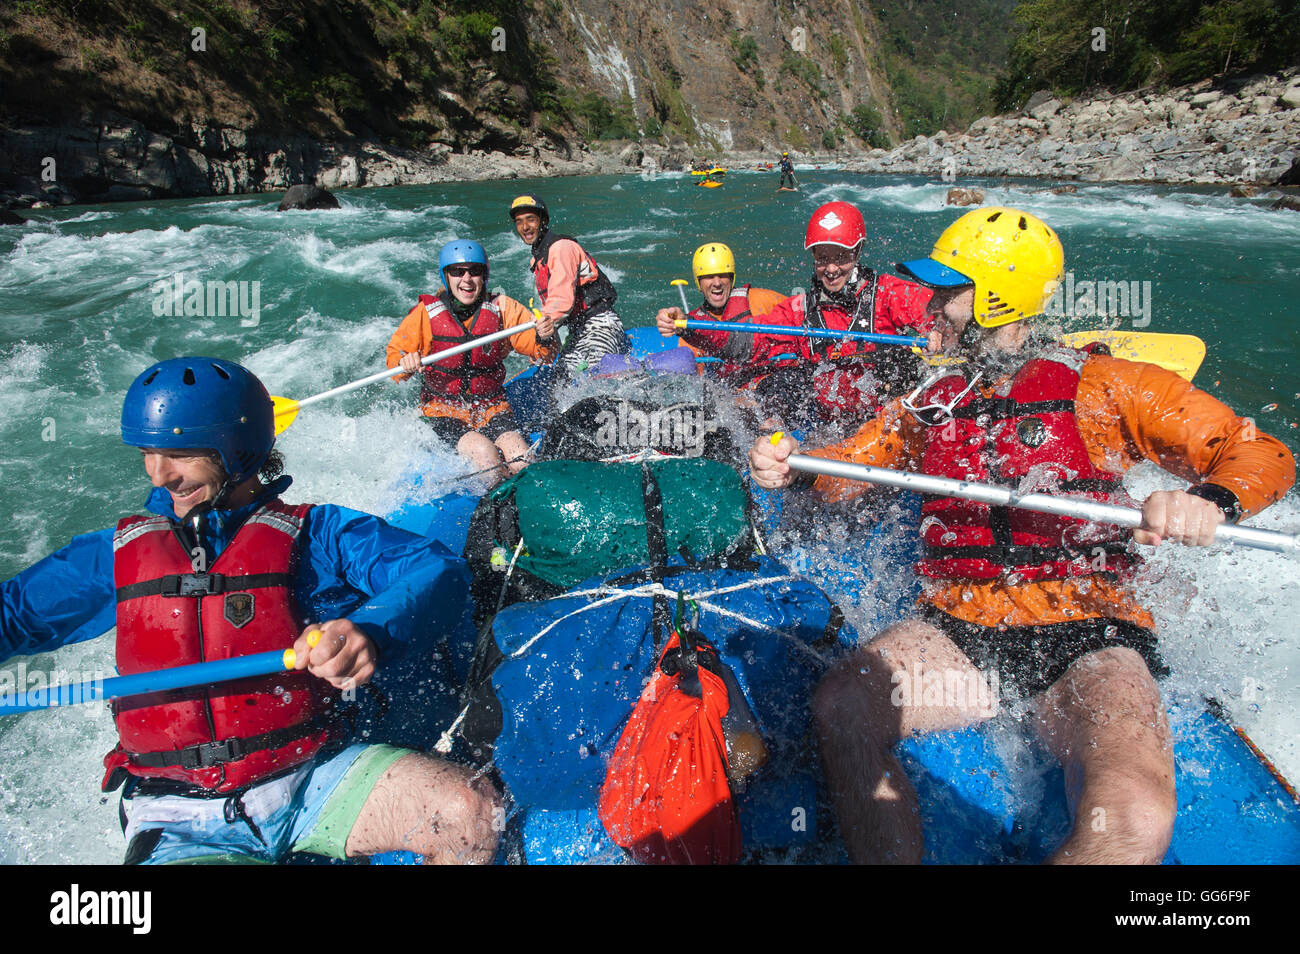 Rafters get splashed as they go through some big rapids on the Karnali River in Nepal, Asia Stock Photo